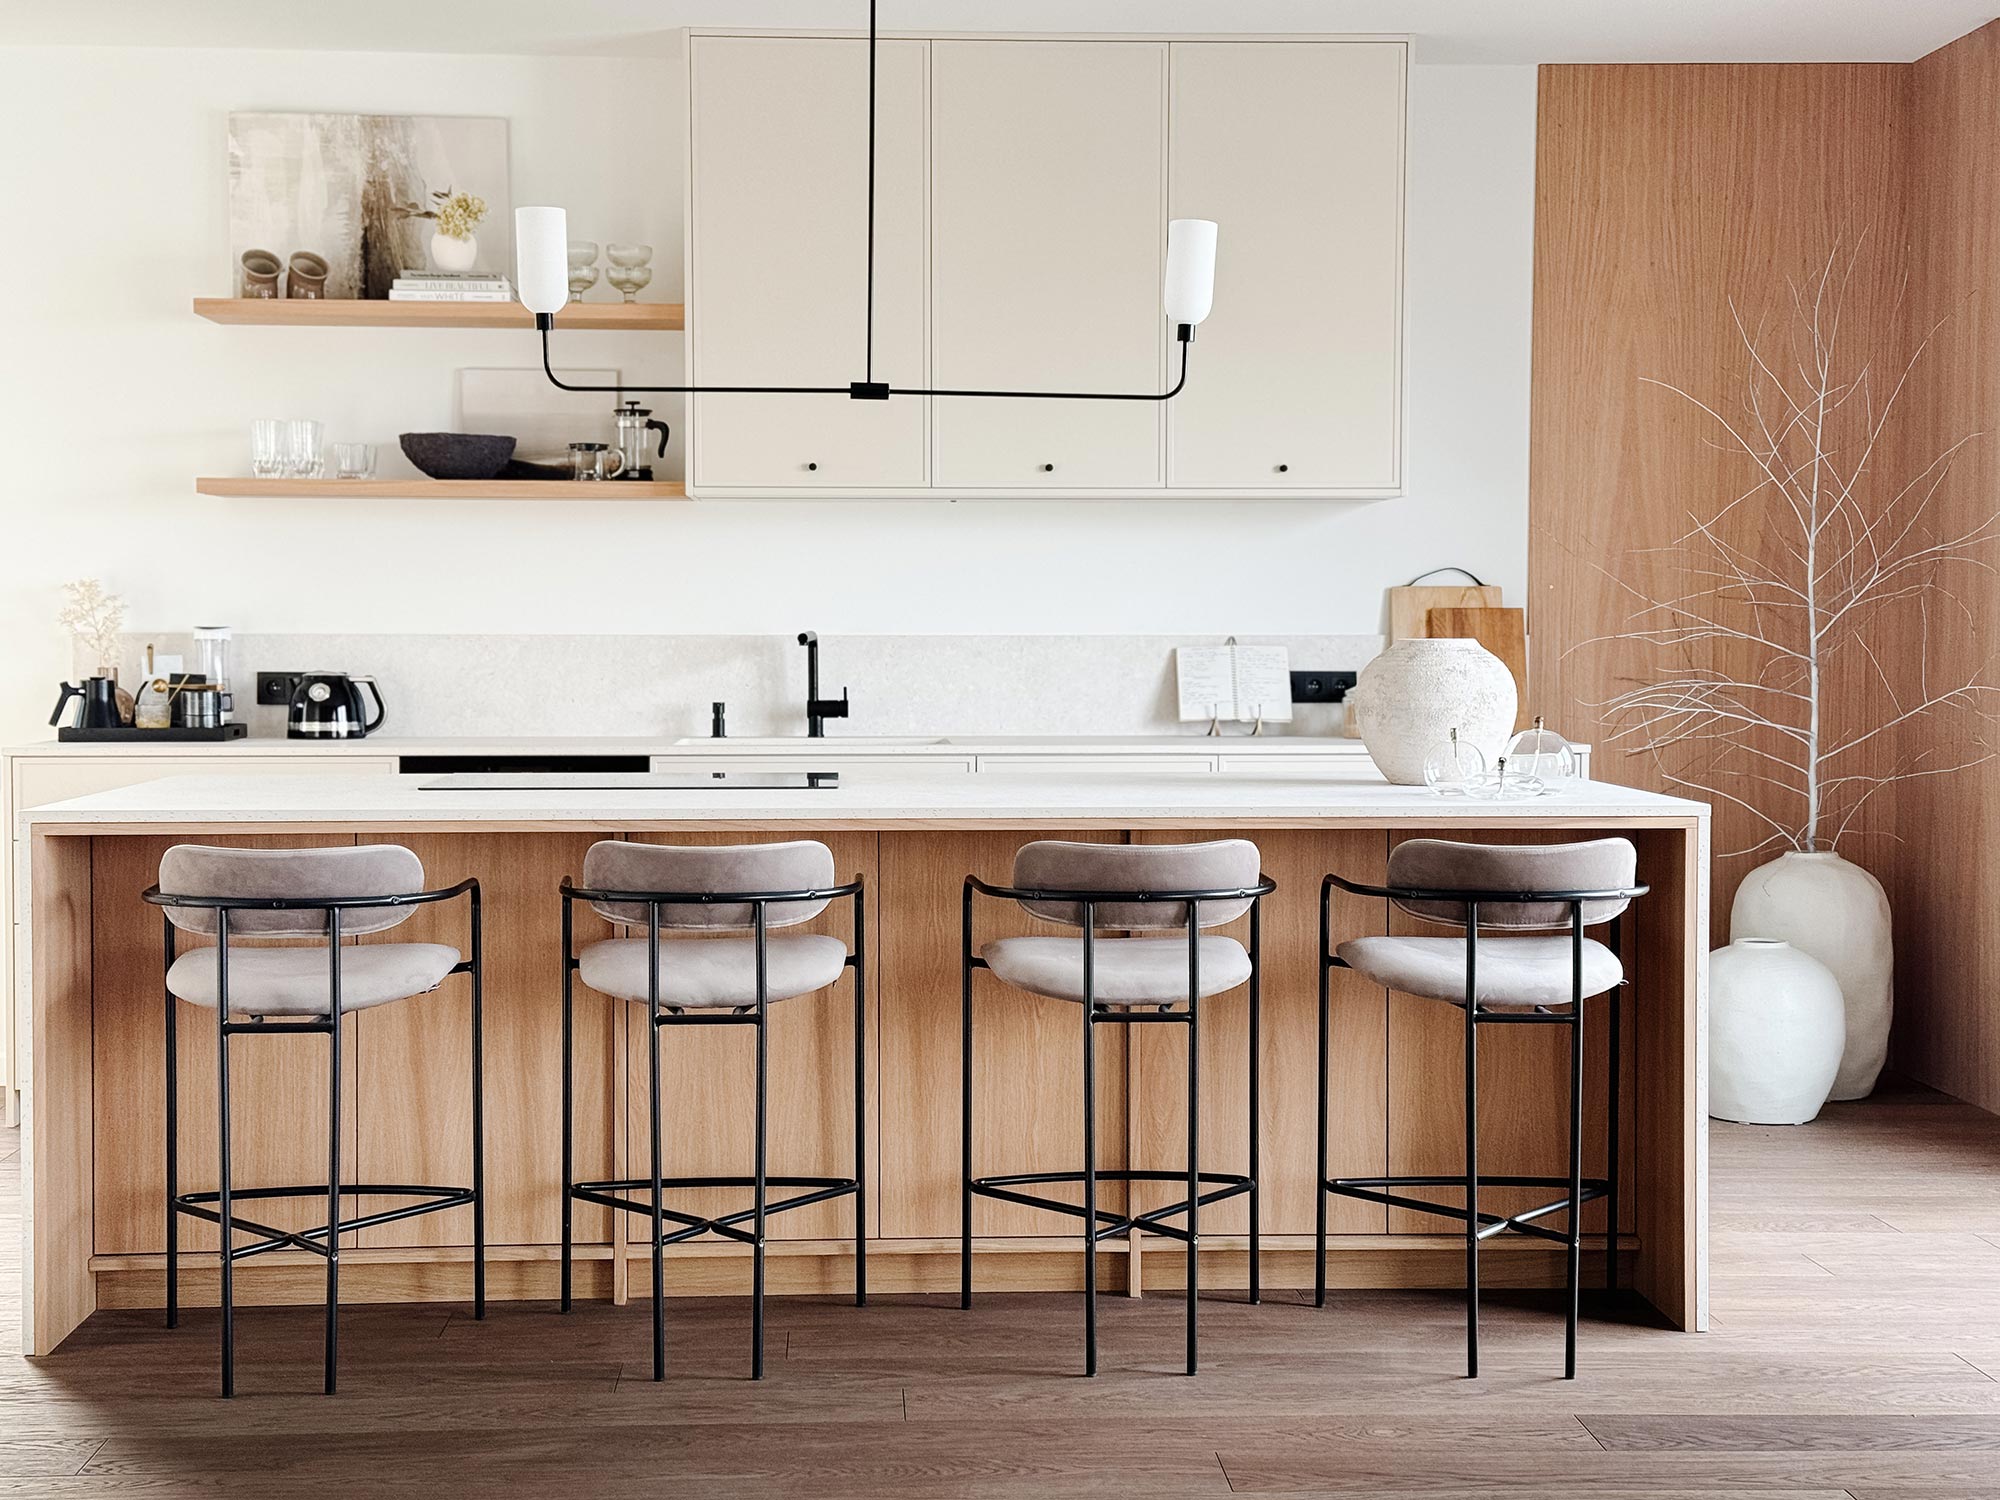 Image of House Loves 15 in All in beige: a personal kitchen that blends styles by House Loves - Cosentino